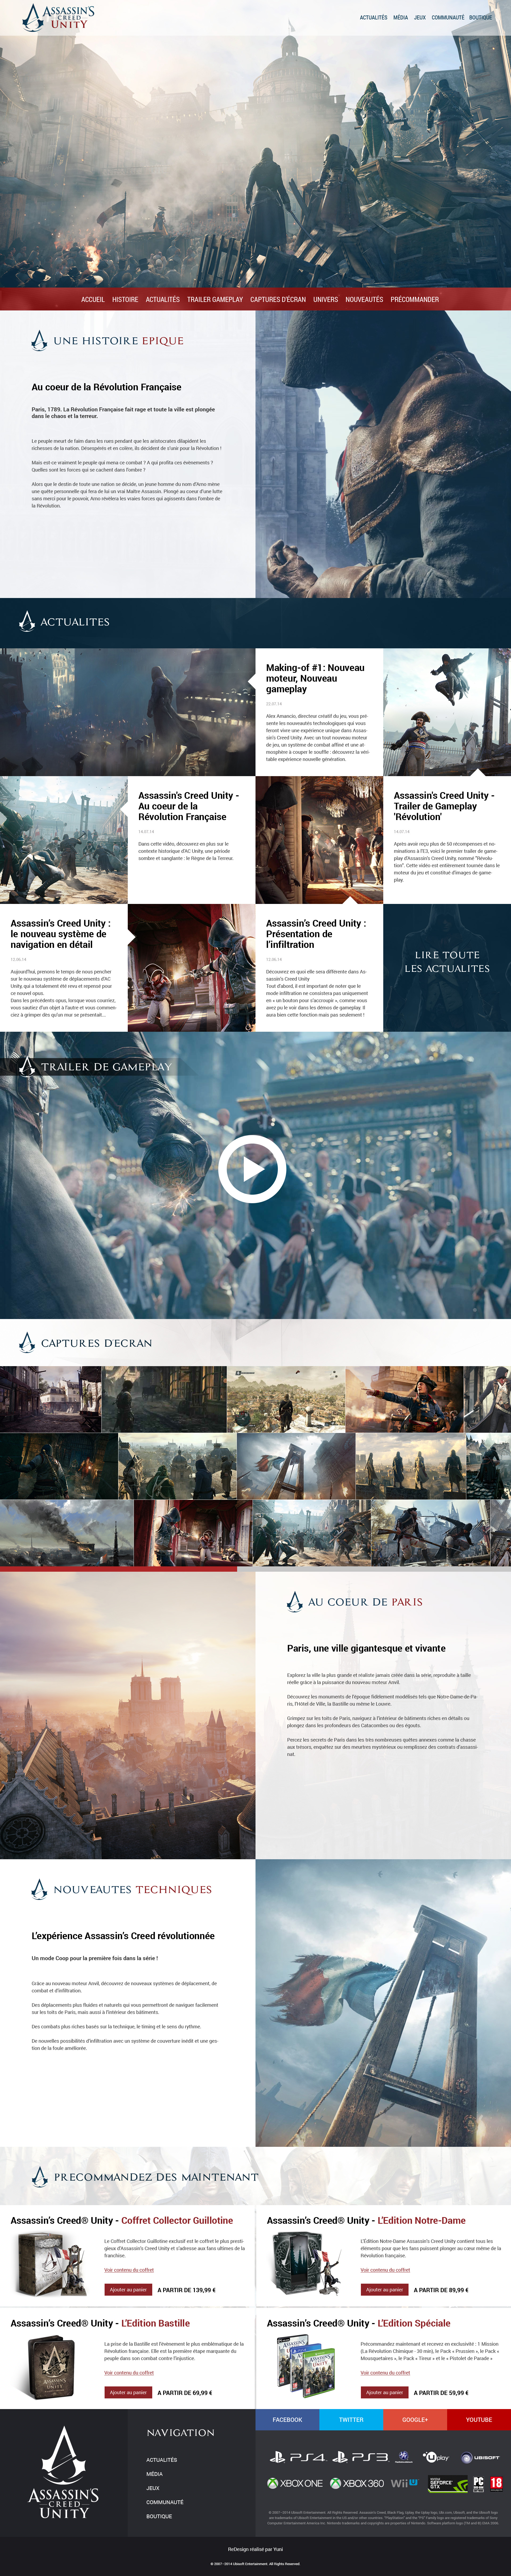 Assassin's Creed Unity Website ReDesign